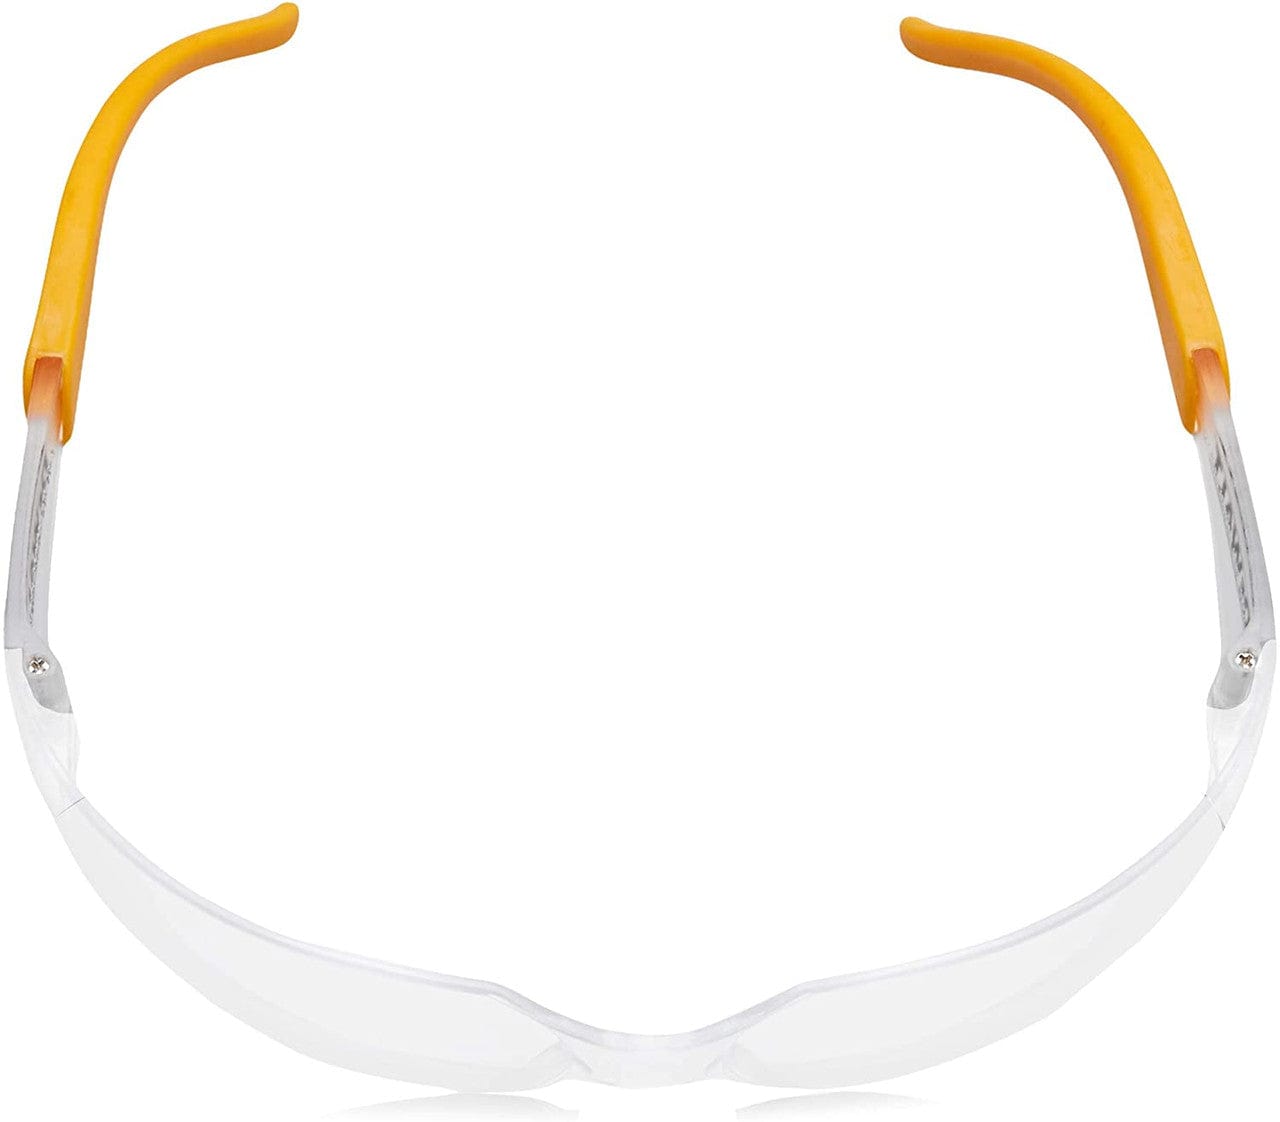 DEWALT Protector Safety Glasses with Clear Anti-Fog Lens DPG54-11D Top View